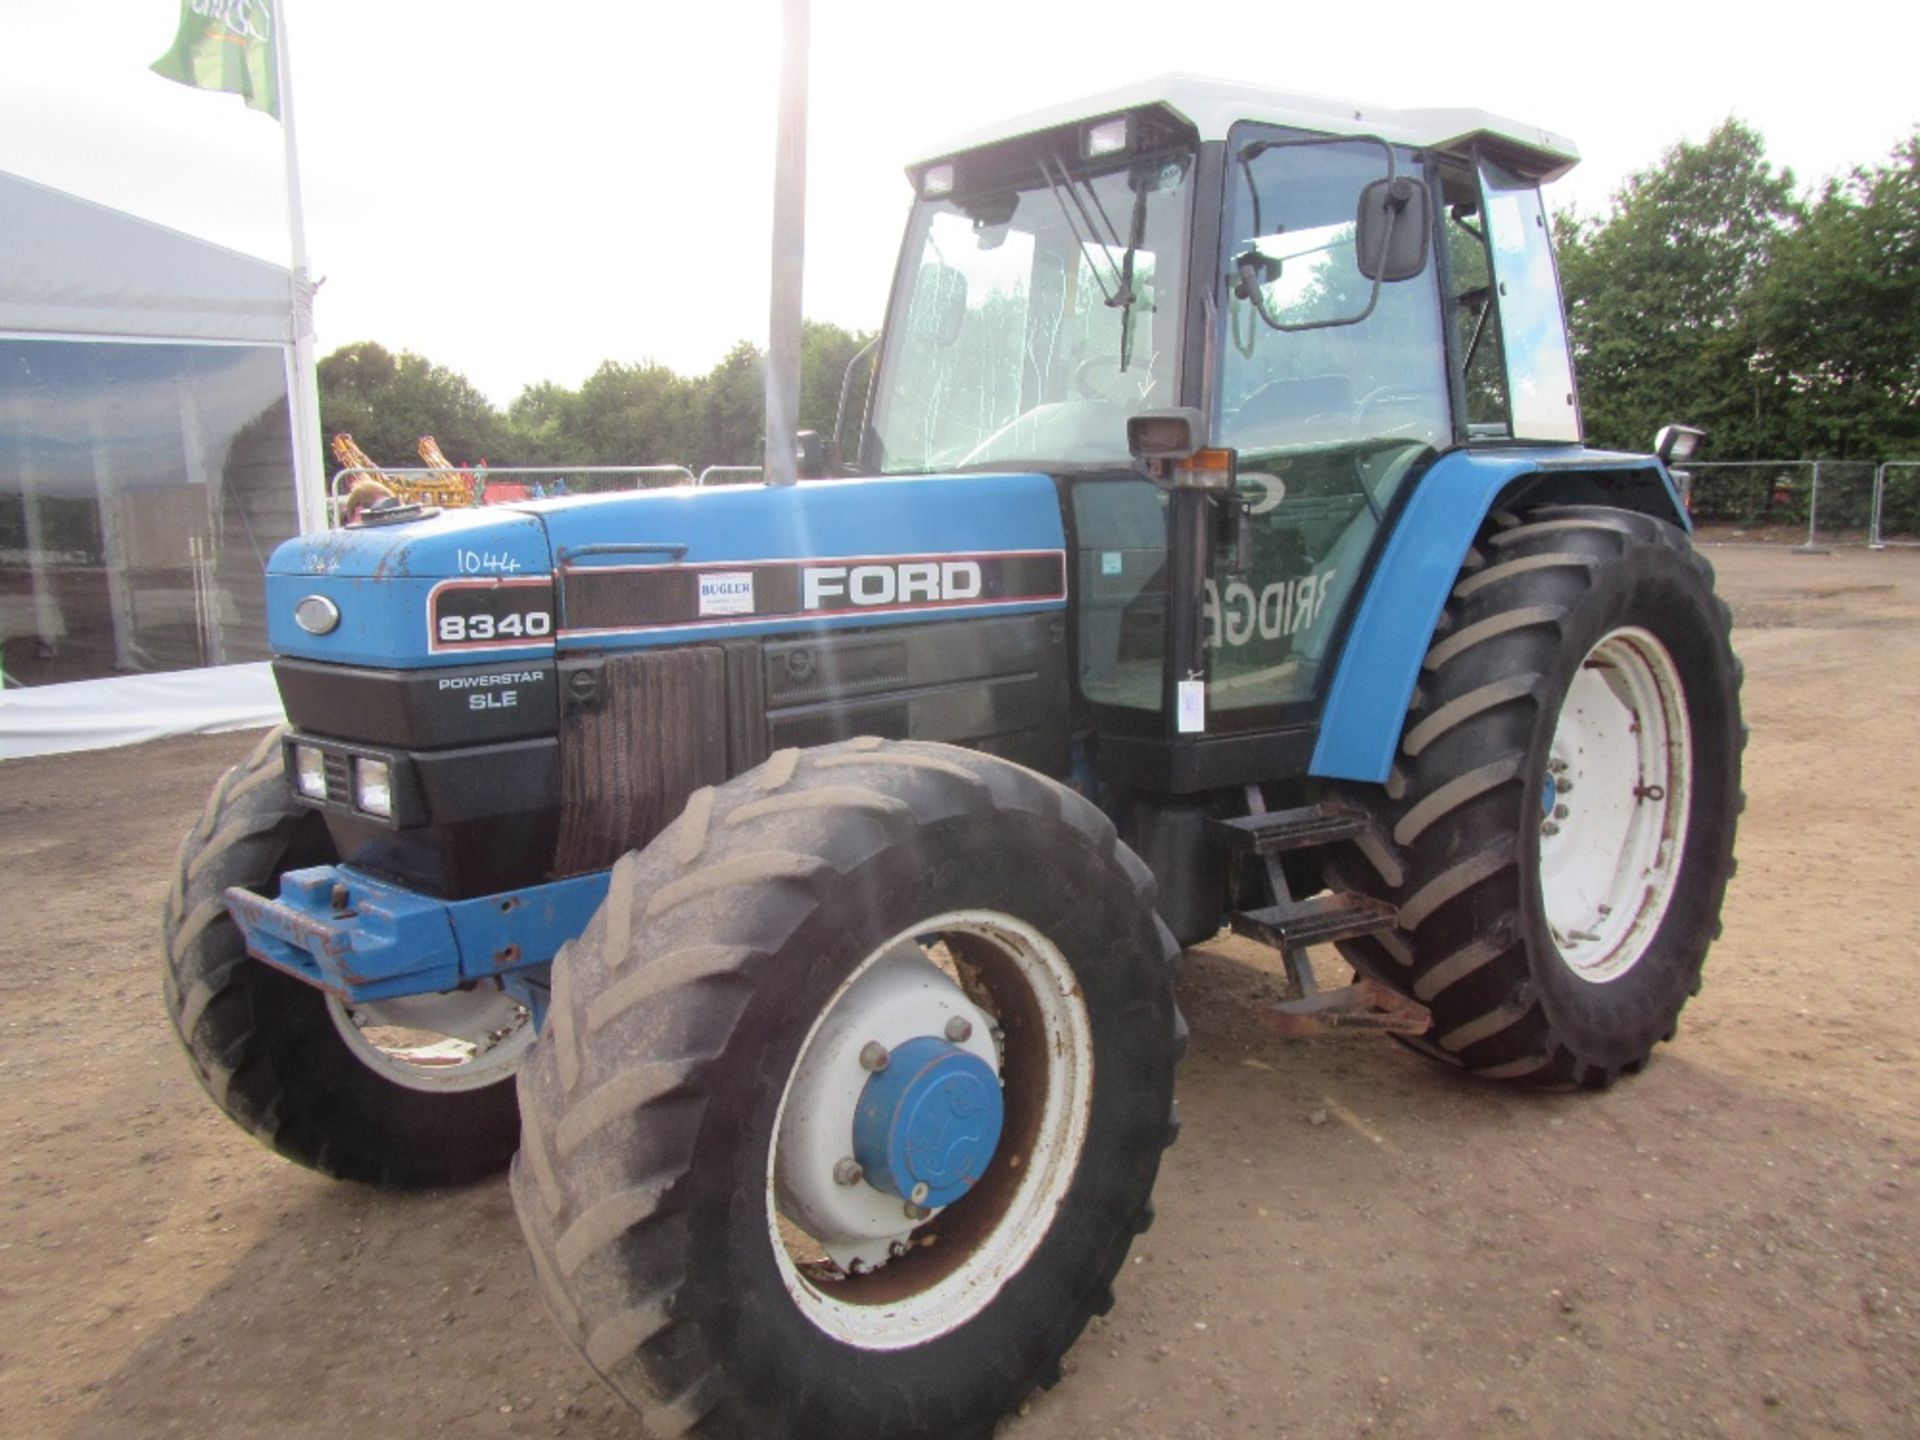 Ford New Holland 8340 SLE 40k Tractor with Air Con. Reg. No. M229 JLJ